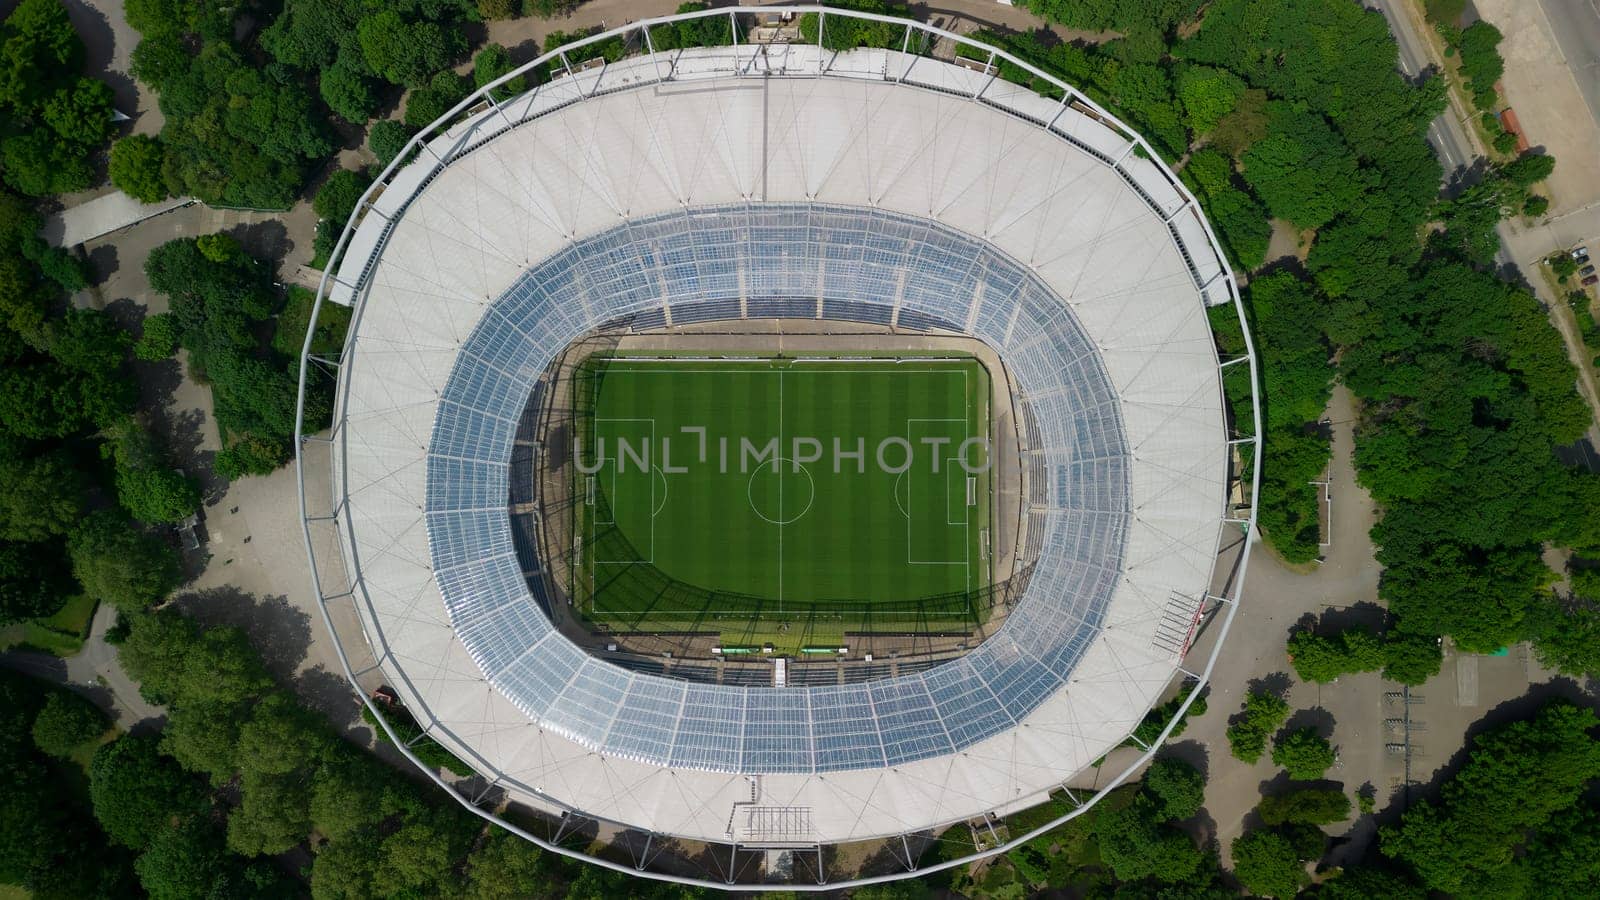 Aerial photography of an entire stadium in Hannover, Germany by mot1963